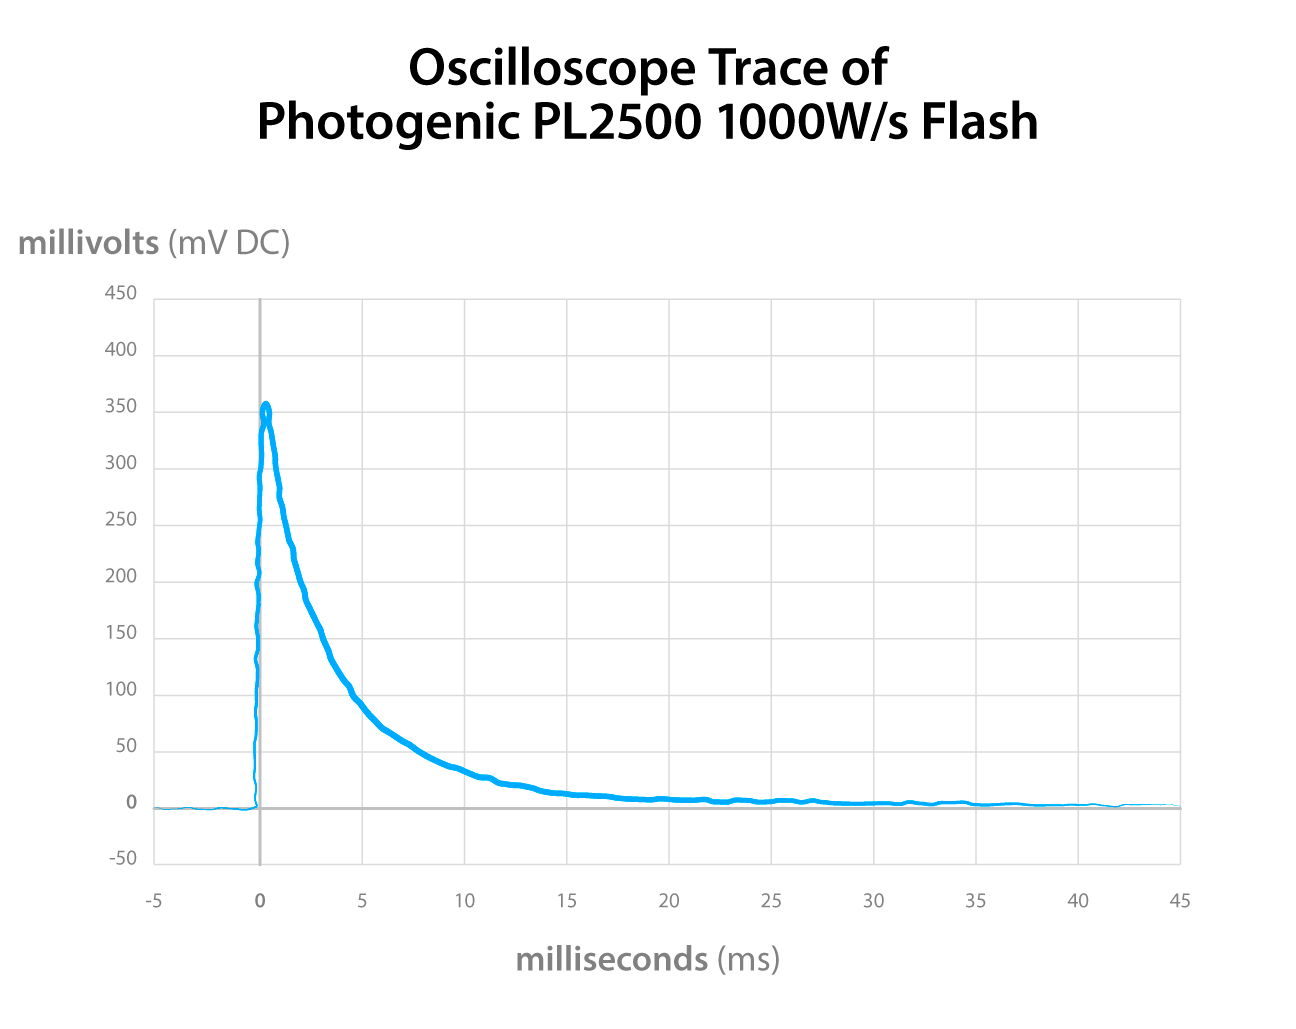 Oscilloscope trace of Photogenic PL2500 1000W/s flash by Hadland Imaging.